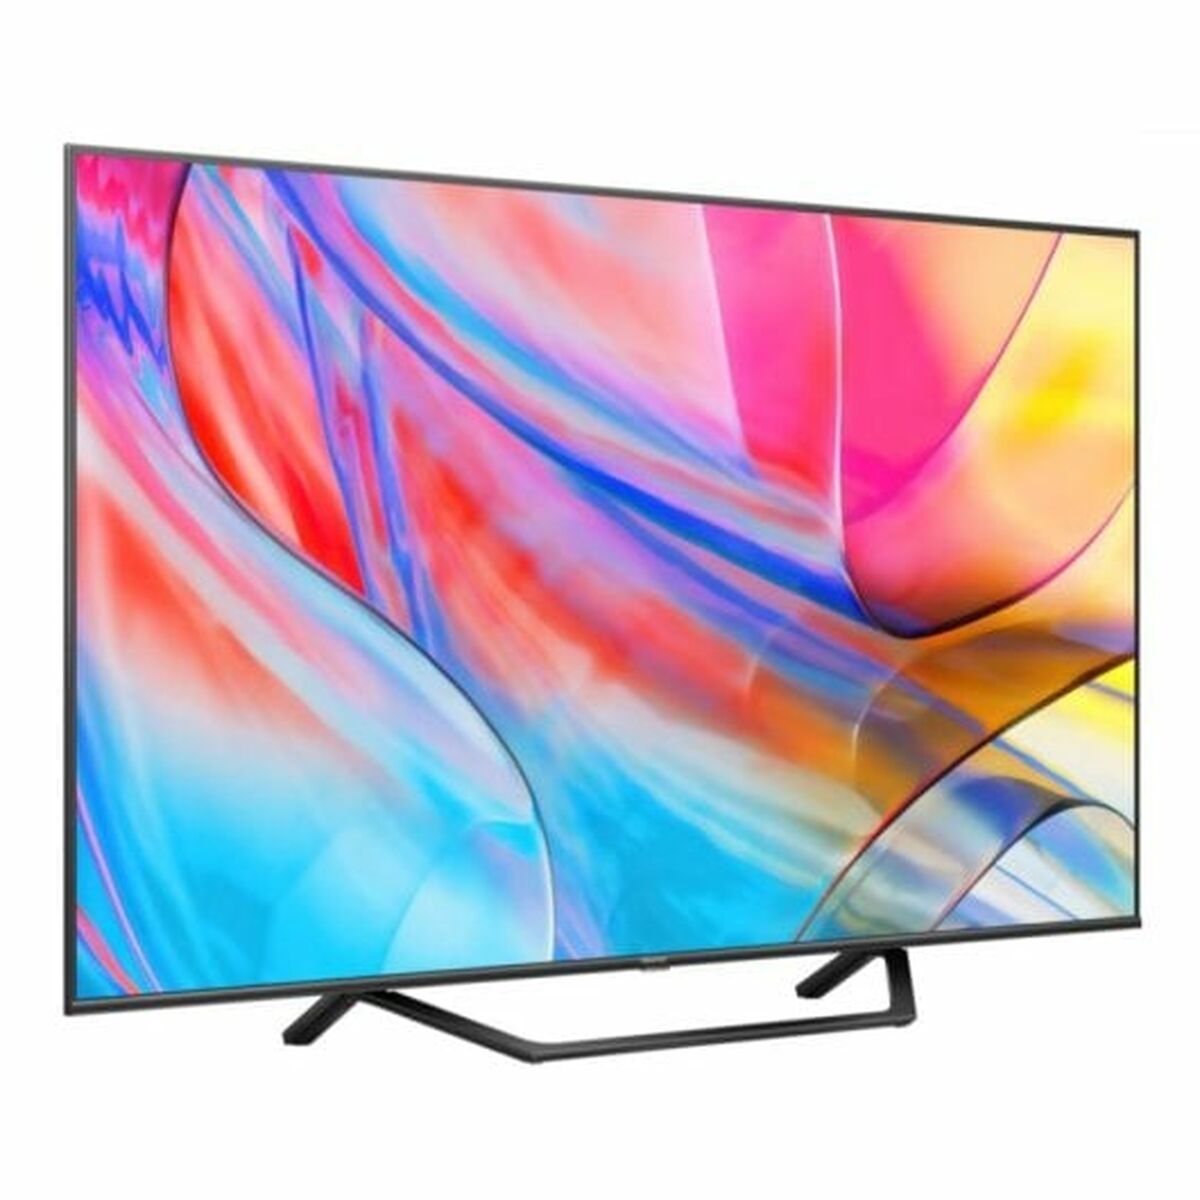 Smart TV Hisense 65A7KQ 4K Ultra HD 43" LED HDR D-LED QLED, Hisense, Electronics, TV, Video and home cinema, smart-tv-hisense-65a7kq-4k-ultra-hd-43-led-hdr-d-led-qled, Brand_Hisense, category-reference-2609, category-reference-2625, category-reference-2931, category-reference-t-18805, category-reference-t-18827, category-reference-t-19653, cinema and television, Condition_NEW, entertainment, Price_400 - 500, RiotNook